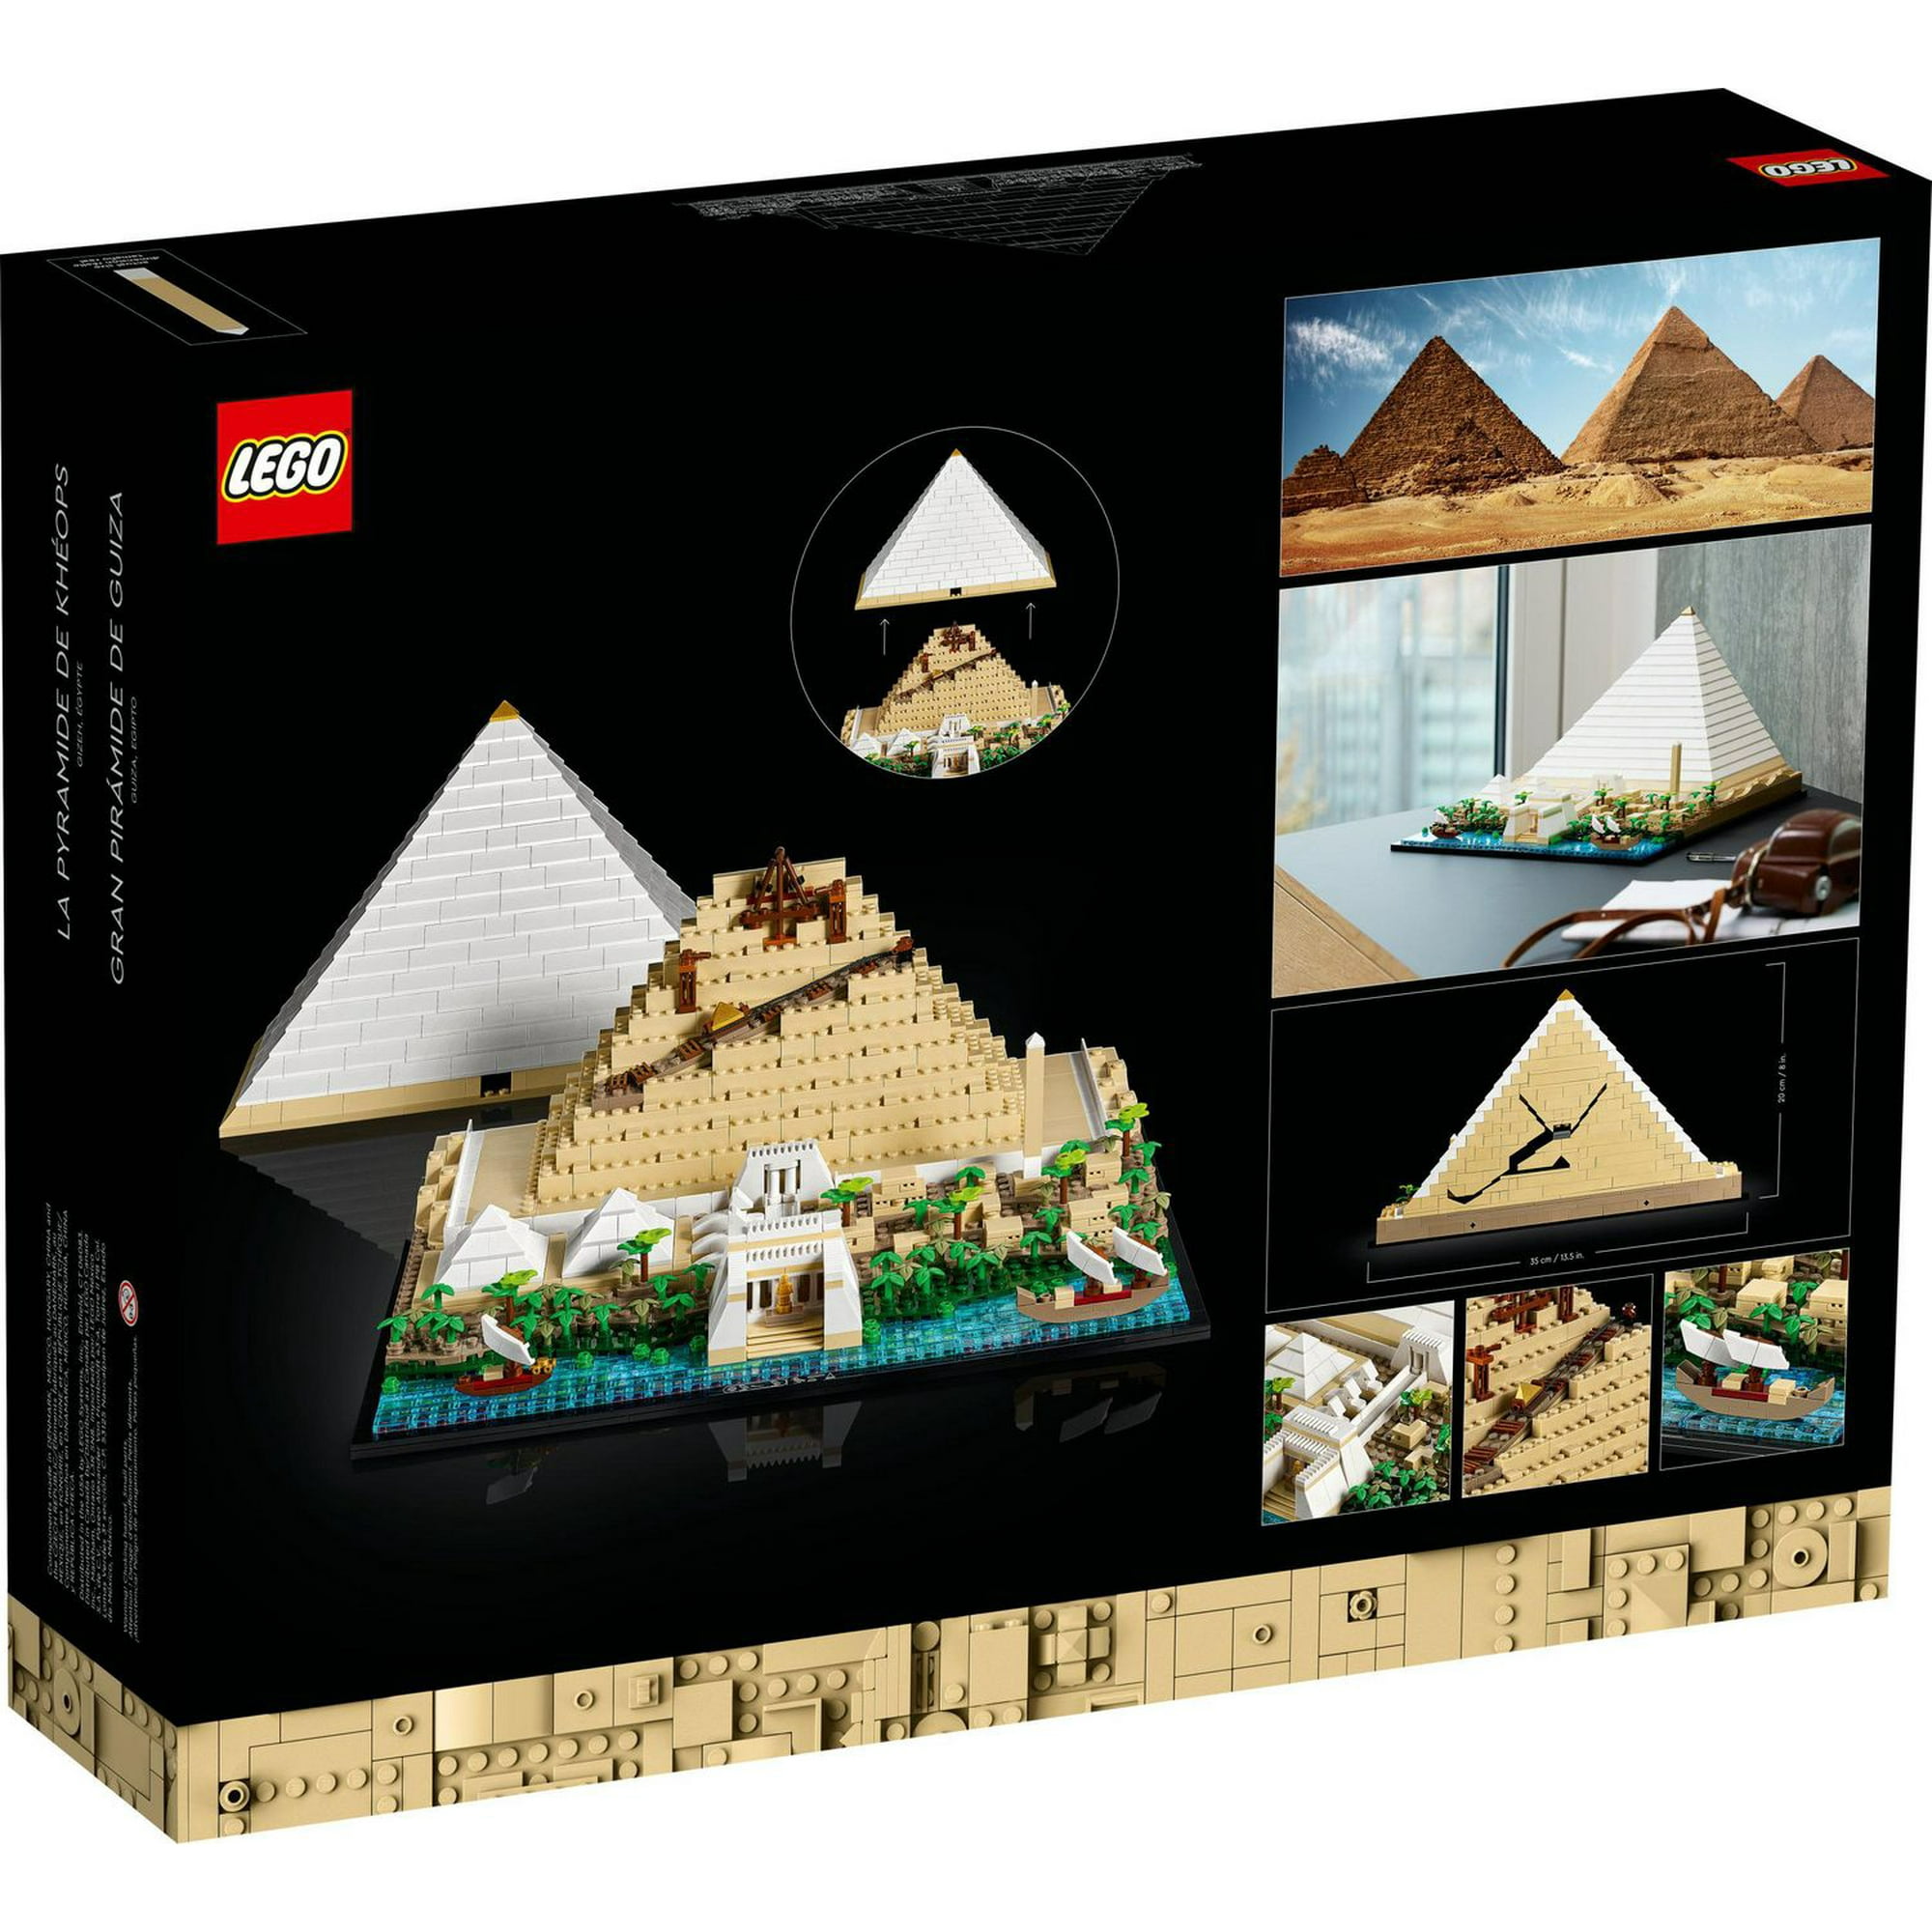 LEGO Architecture Great Pyramid of Giza Set 21058, Home Décor